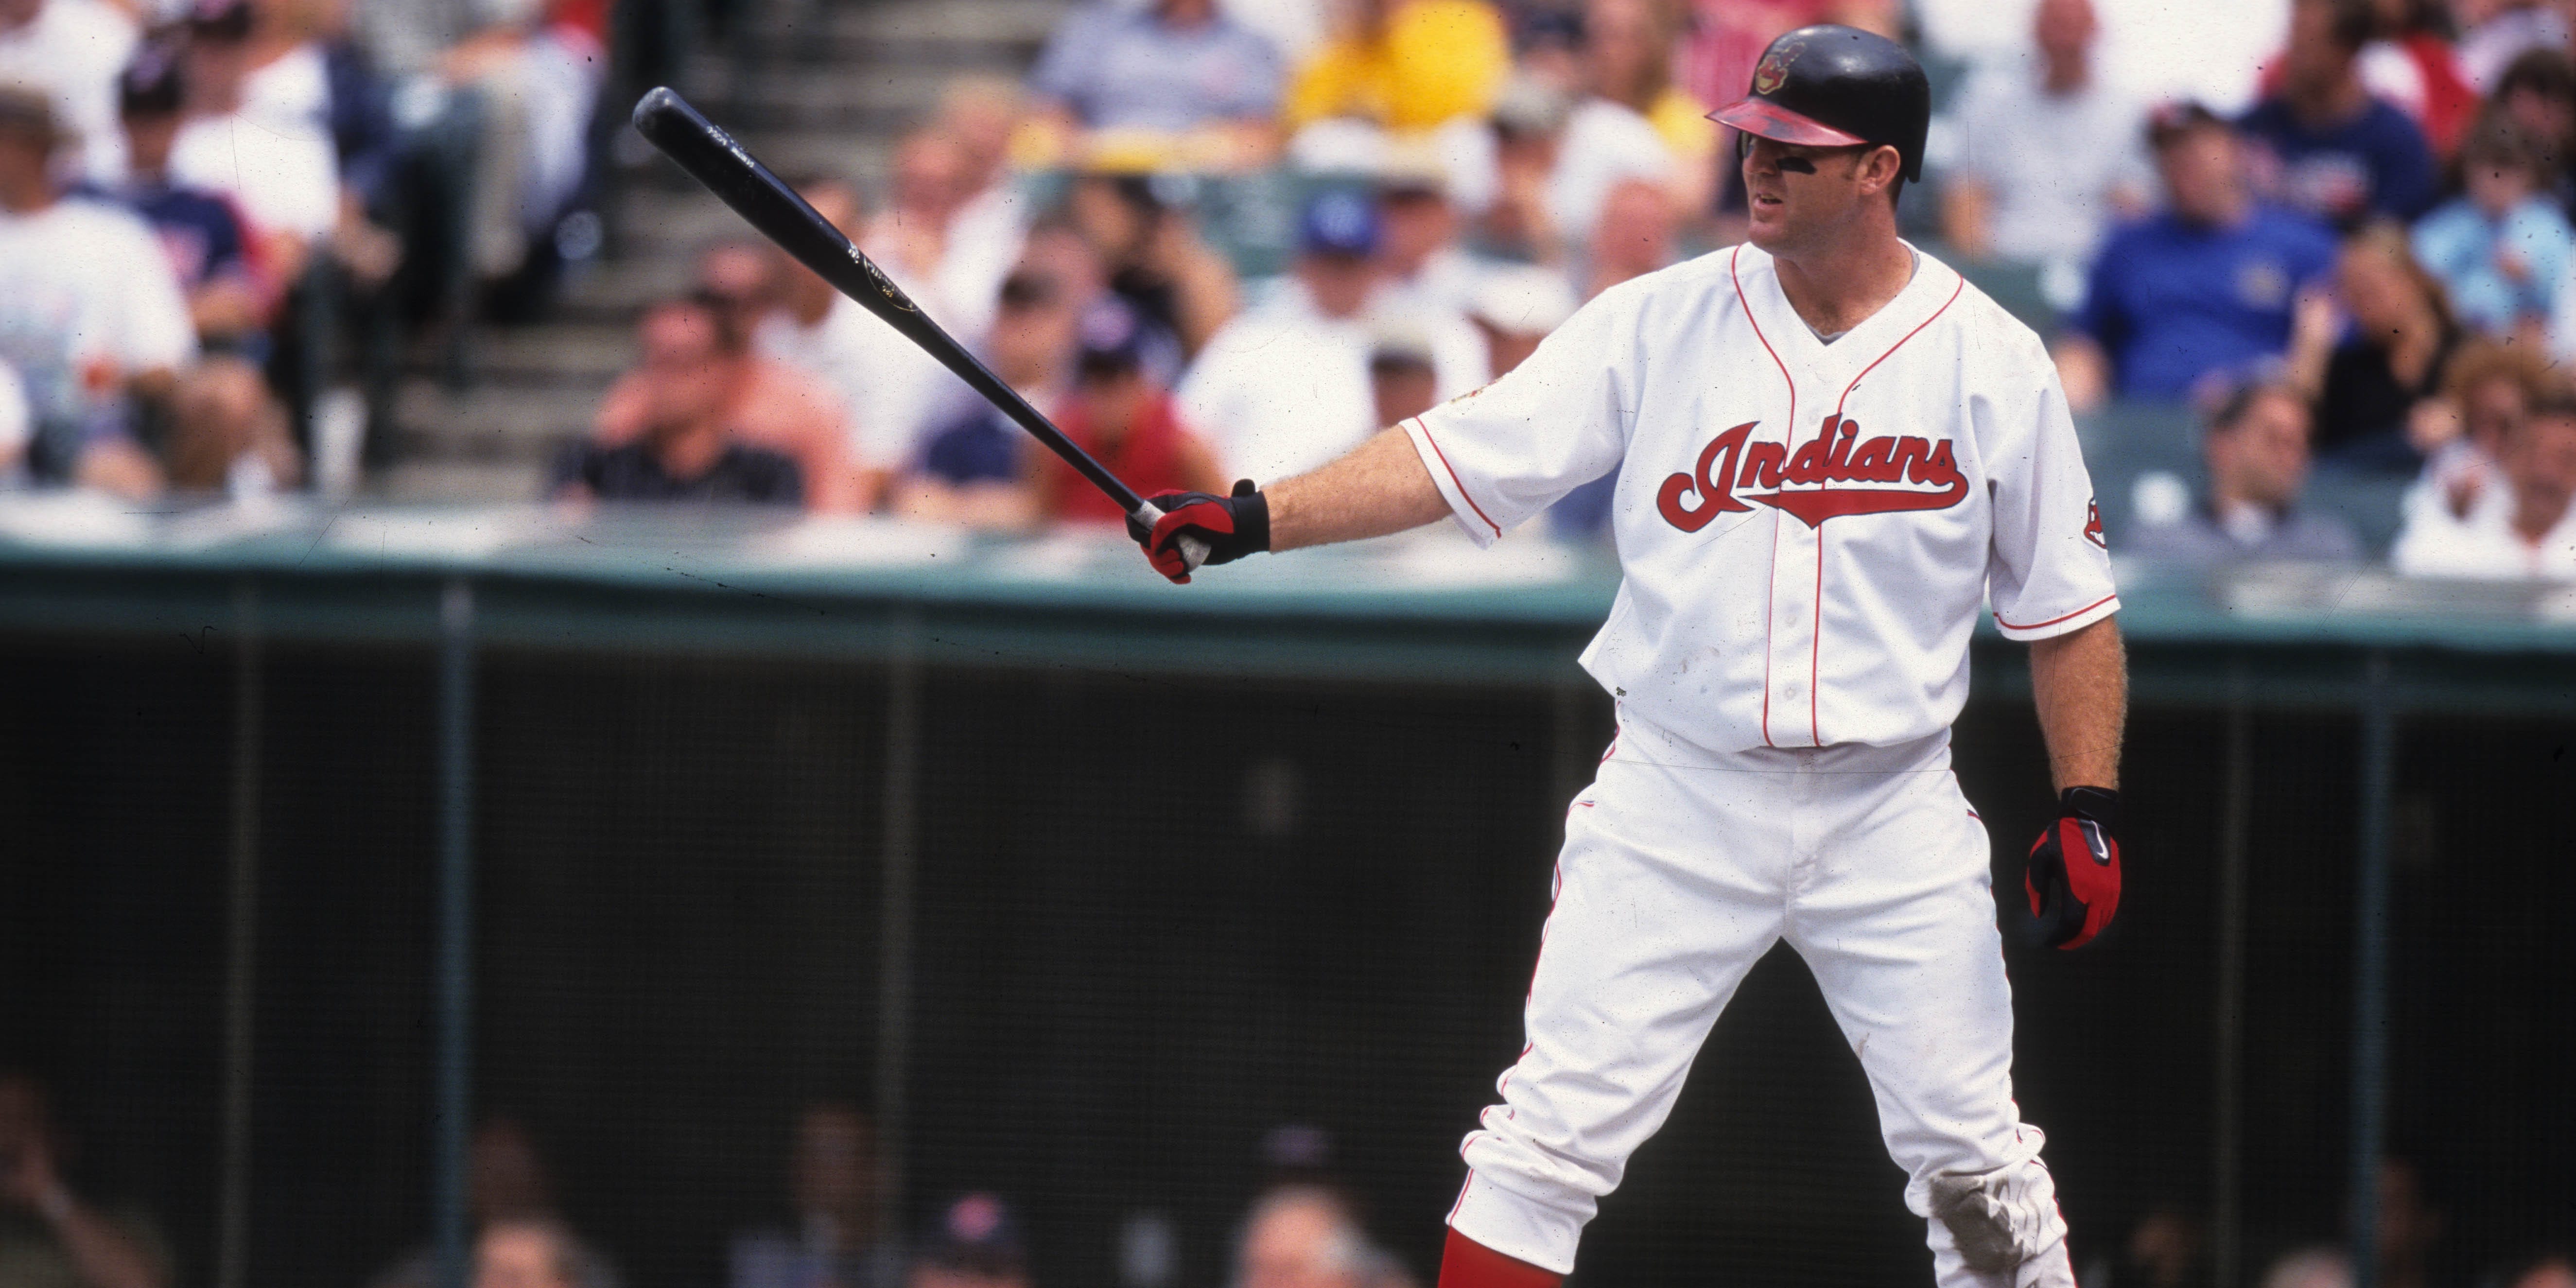 The top 5 moments of Jim Thome's Tribe career